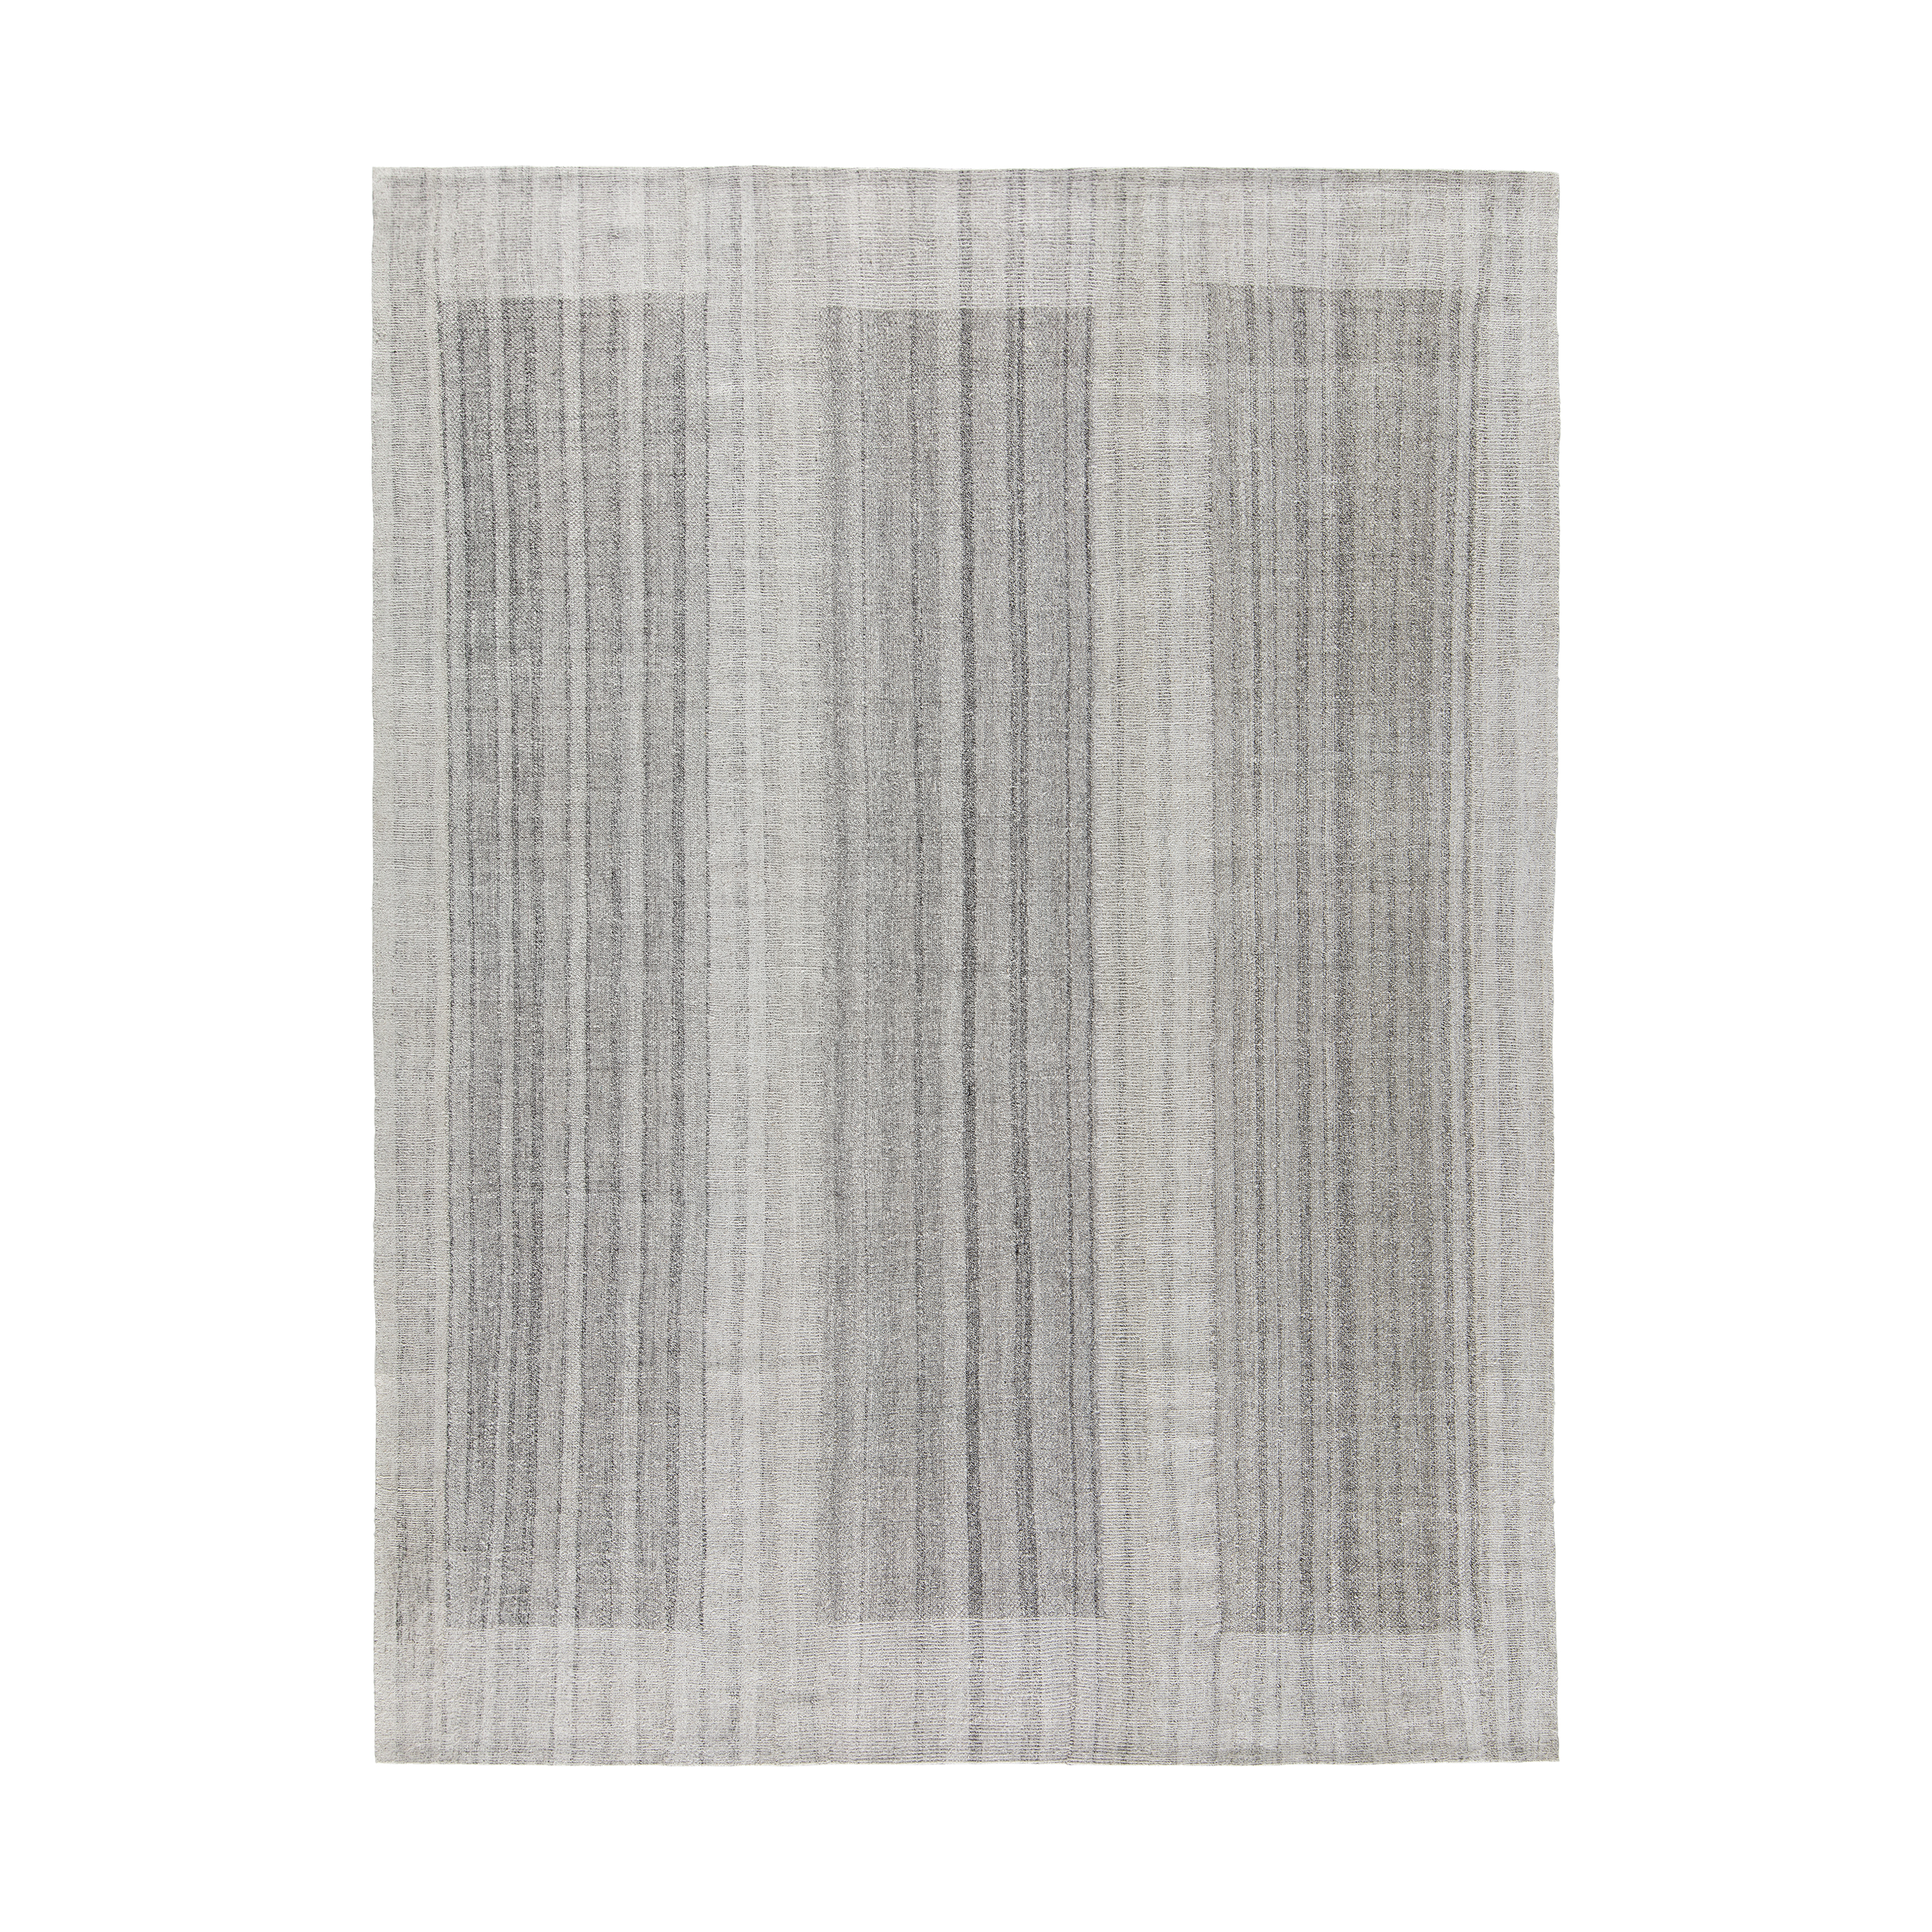 This Pelas Block flatweave rug is made with handspun wool and natural dyes.